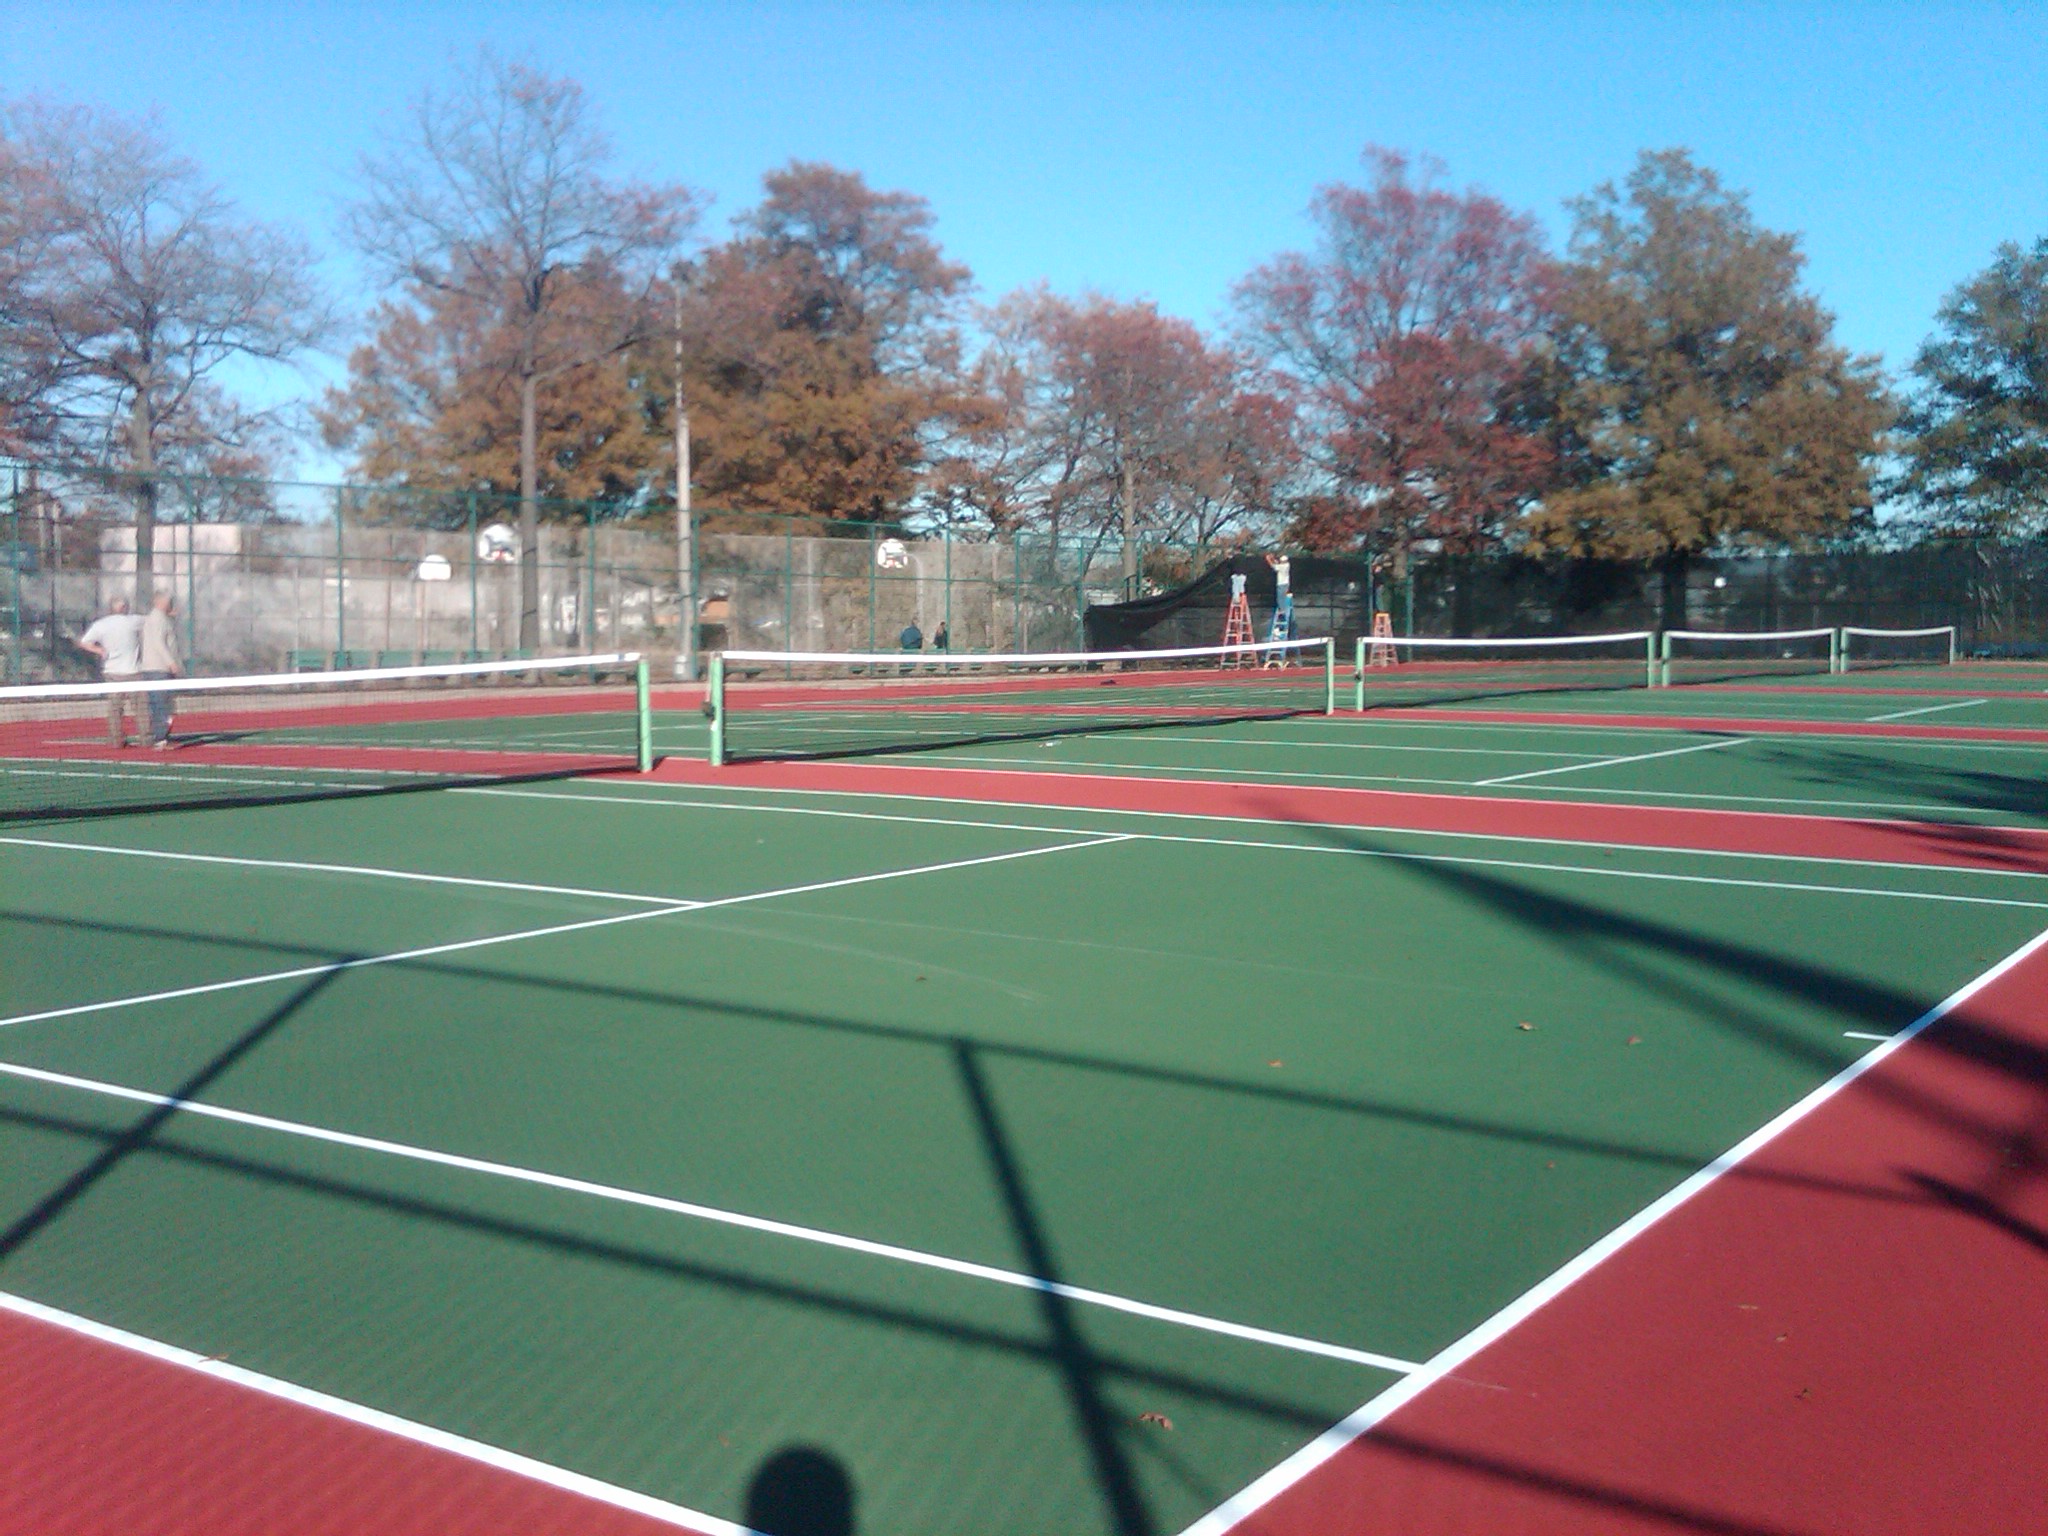 Newly-restored tennis courts at Frank Charles Park.